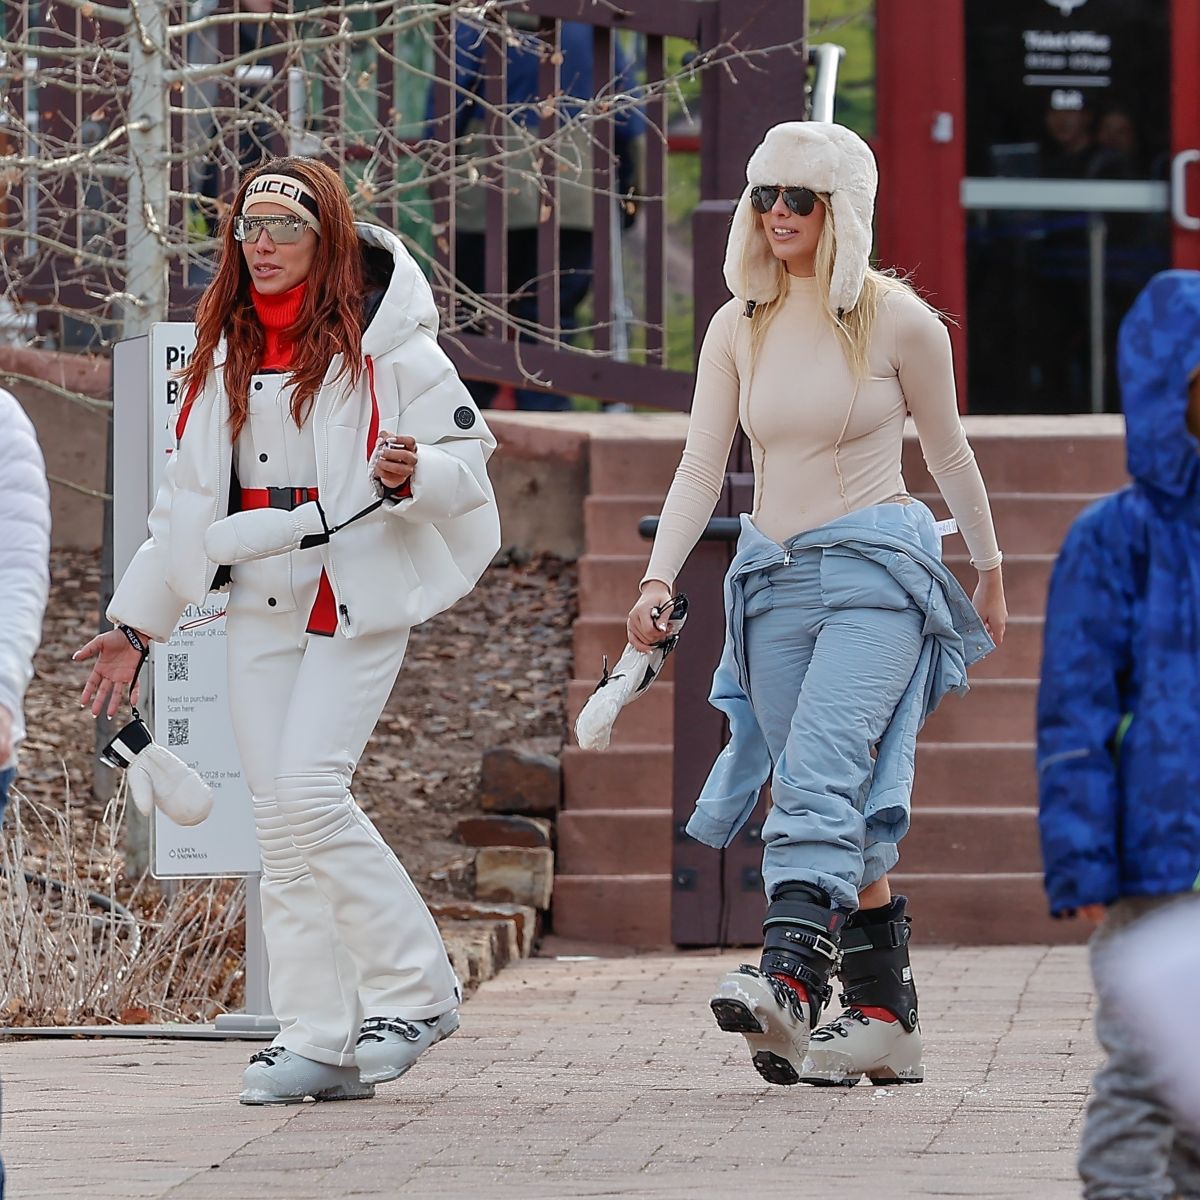 Two celebrities walking together during their Aspen vacation